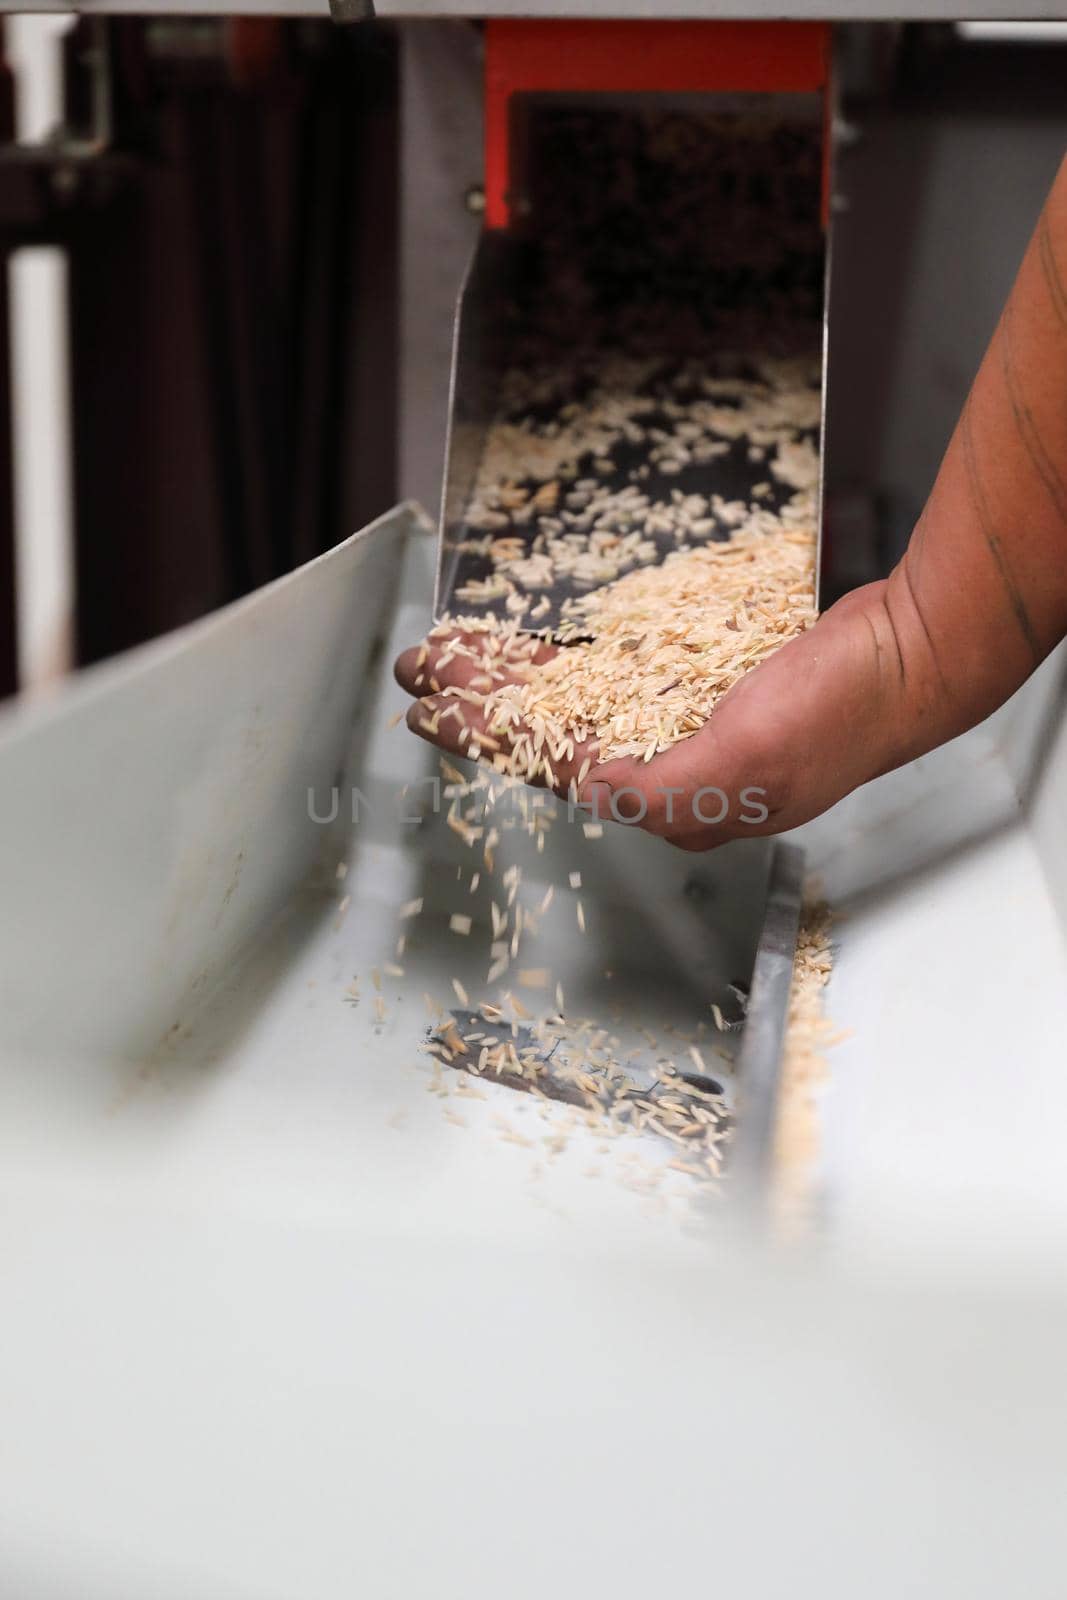 Factory machine Milling rice in close up by piyato